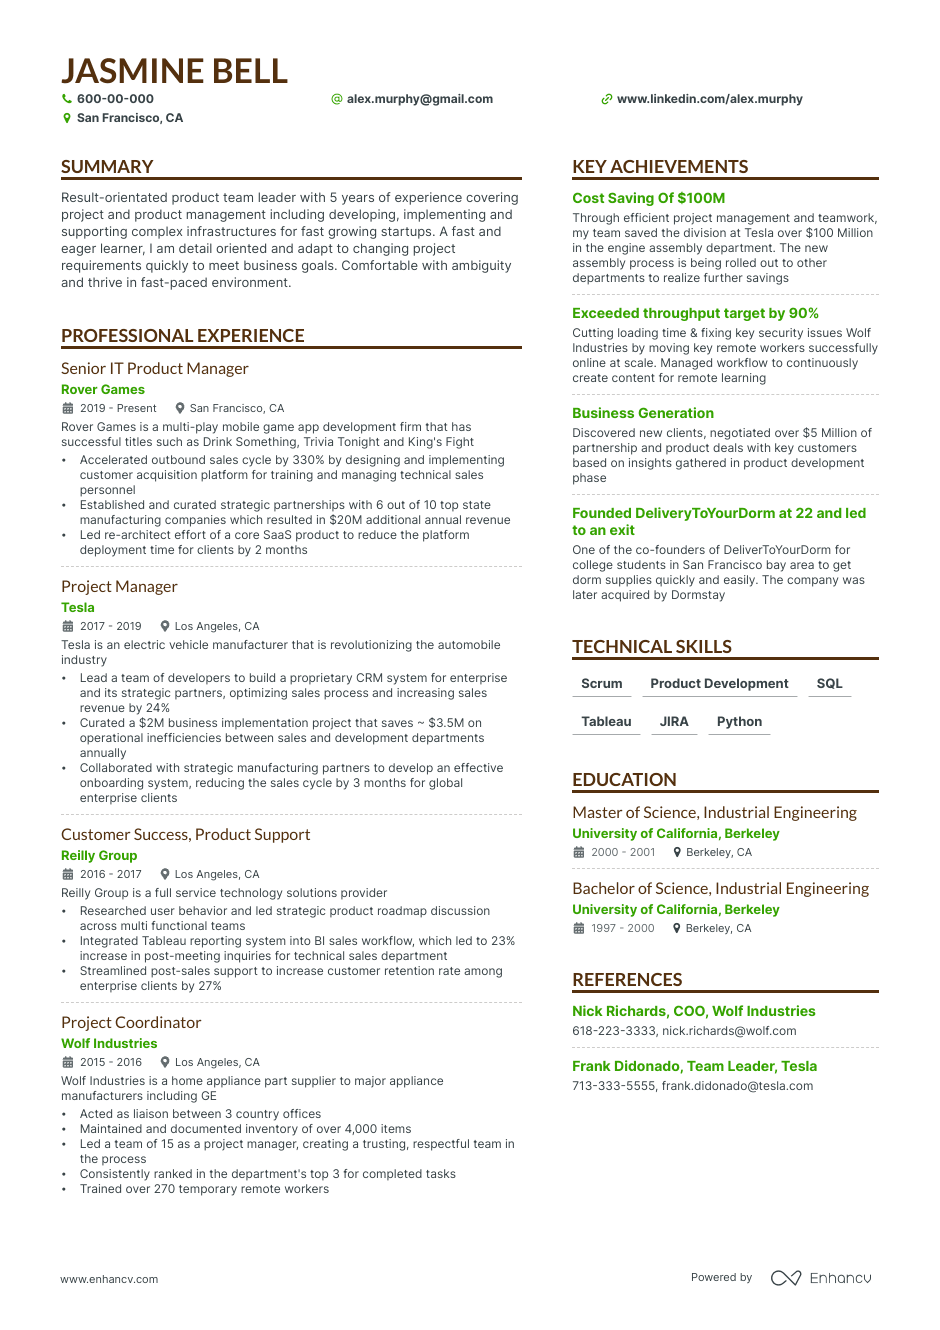 Product Manager resume